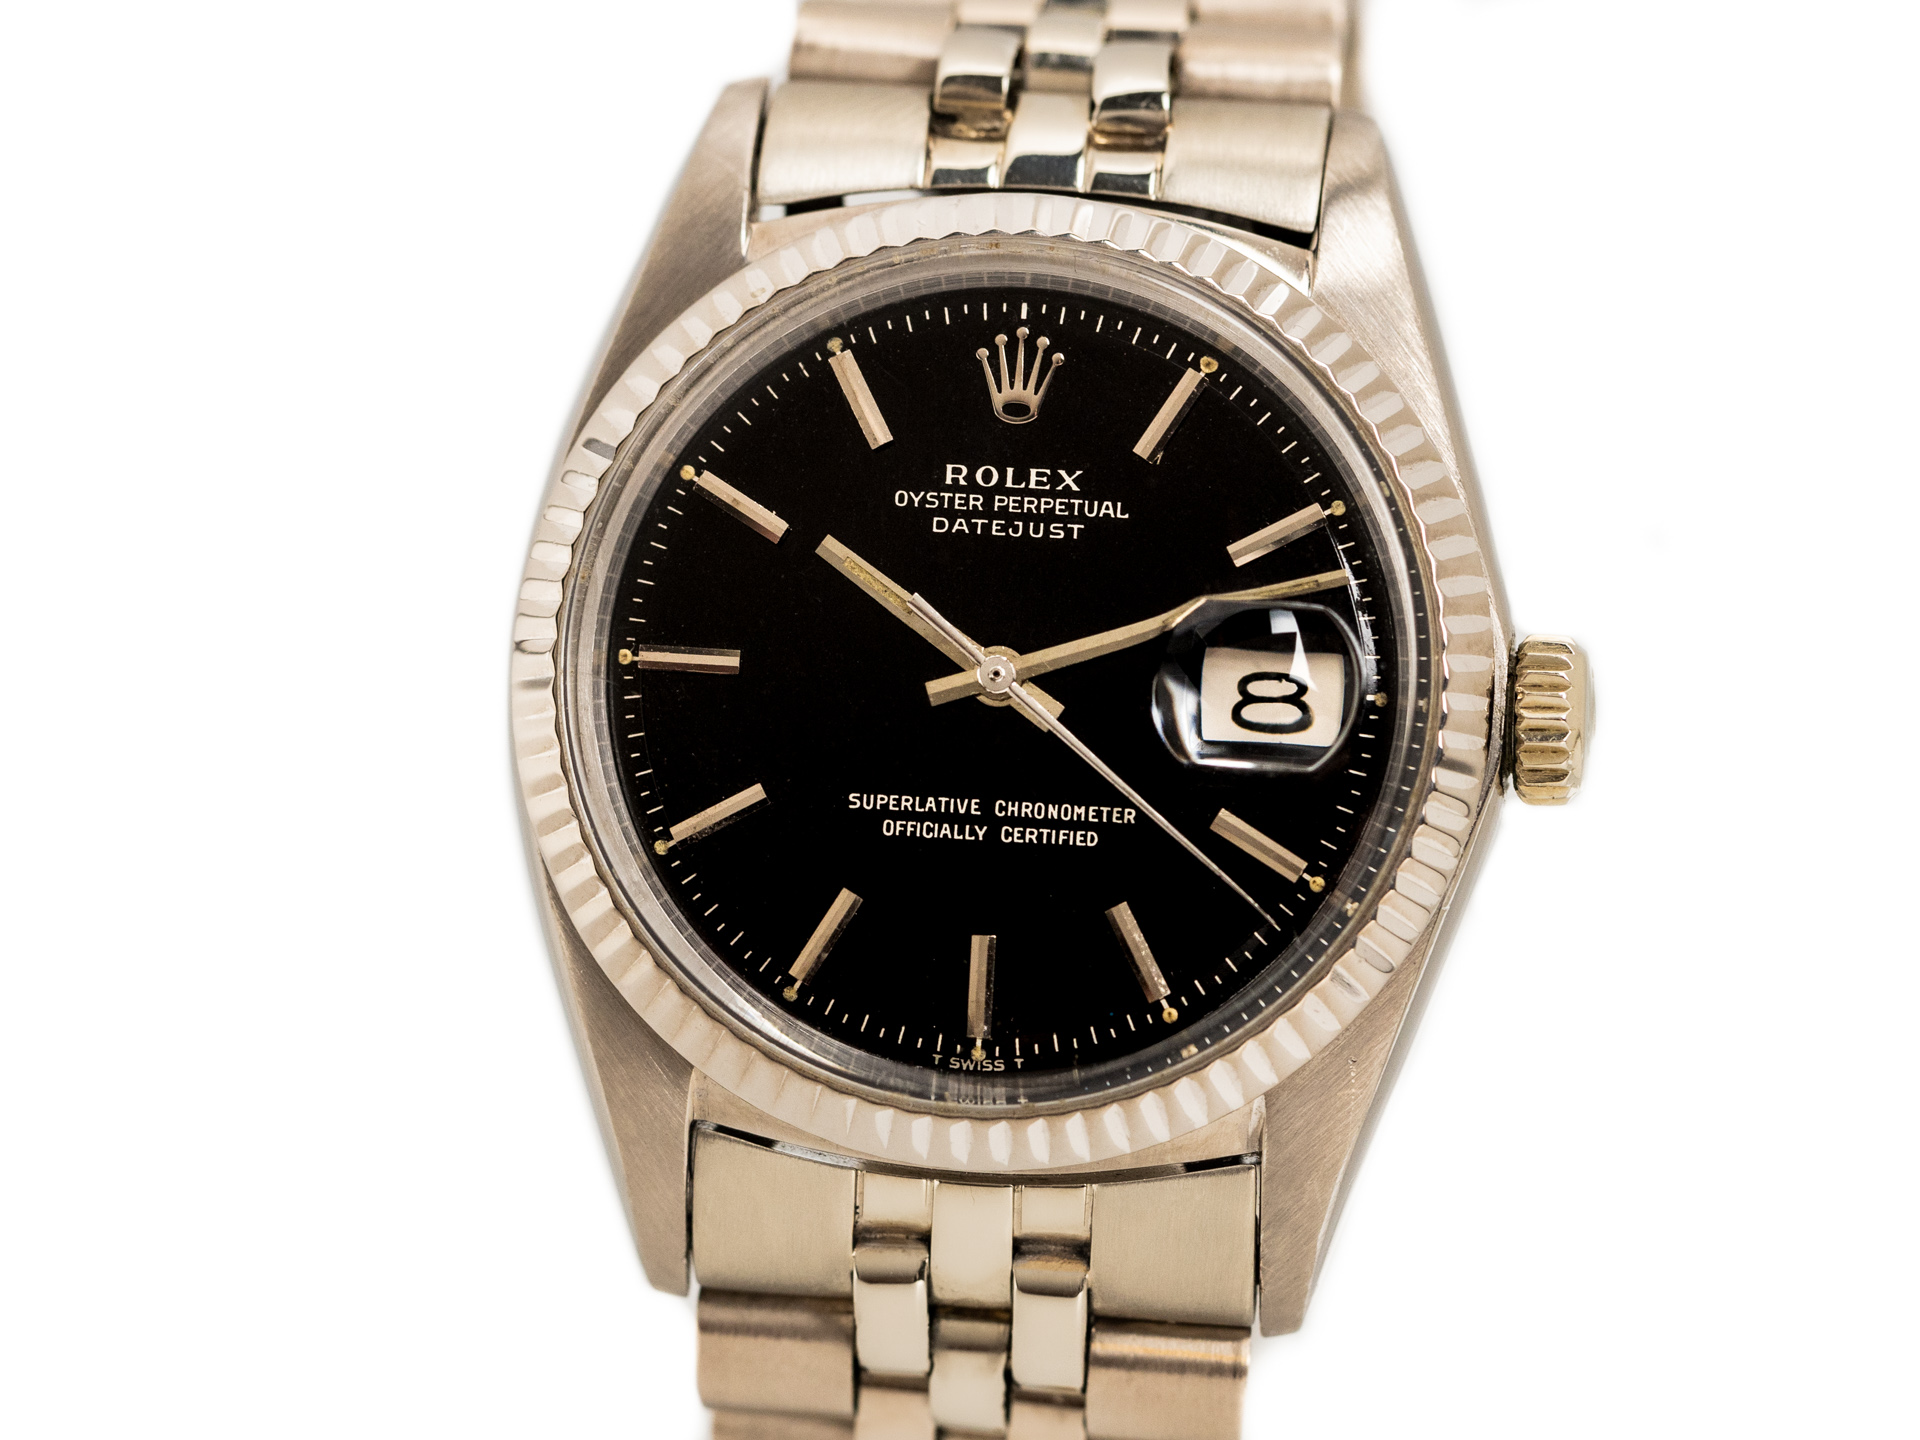 Rolex Datejust 41 126333 18k Gold / Steel Jubilee Bracelet... for Price on  request for sale from a Trusted Seller on Chrono24